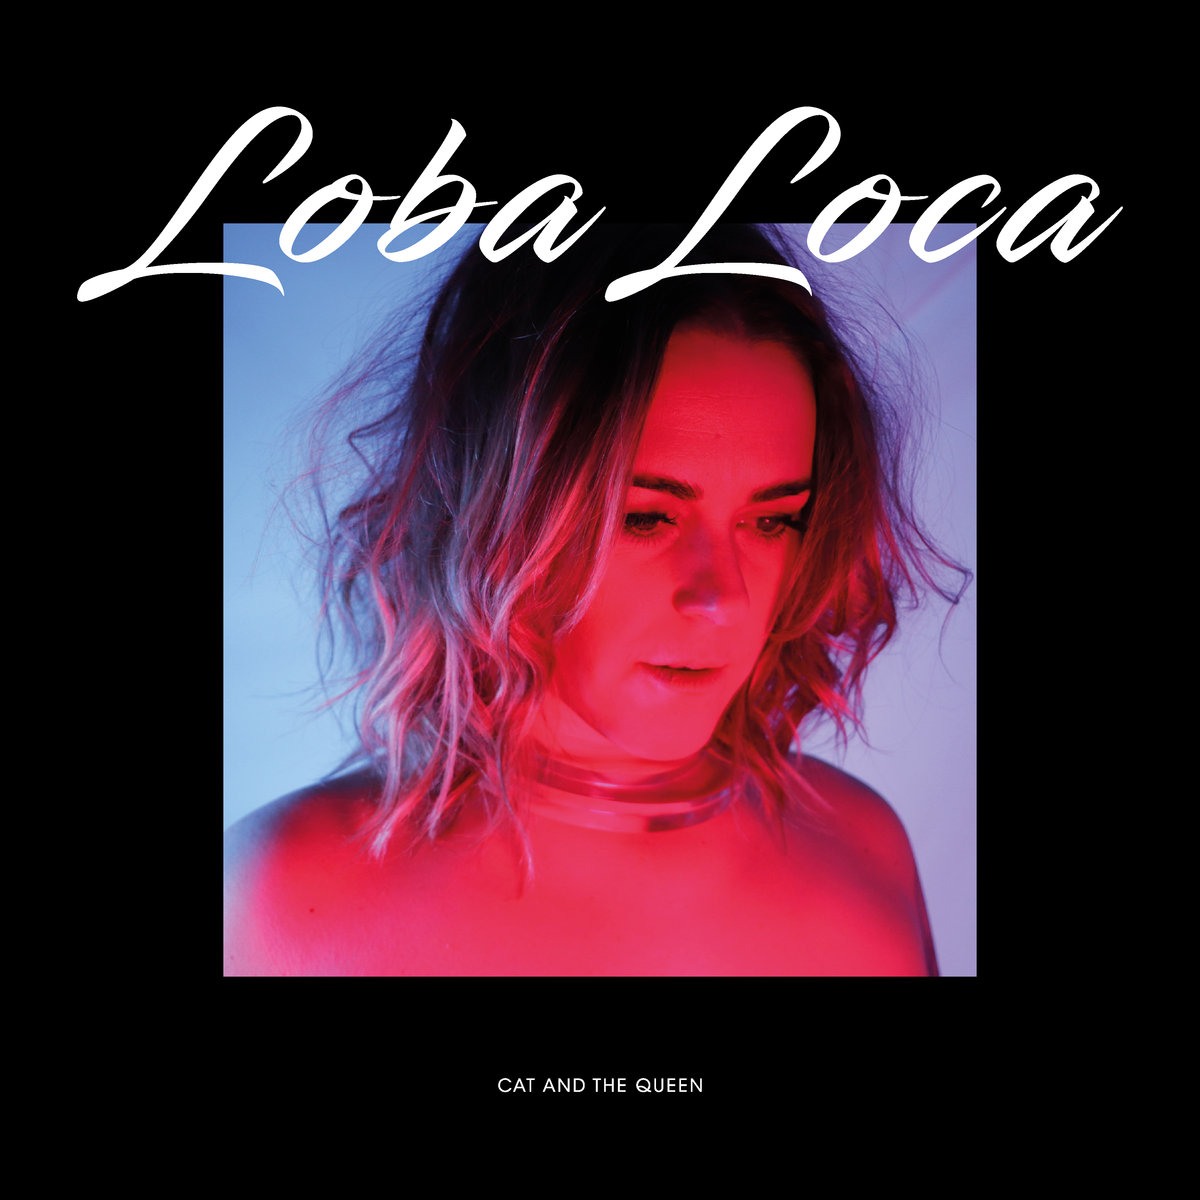 Loba Loca by Cat and the Queen